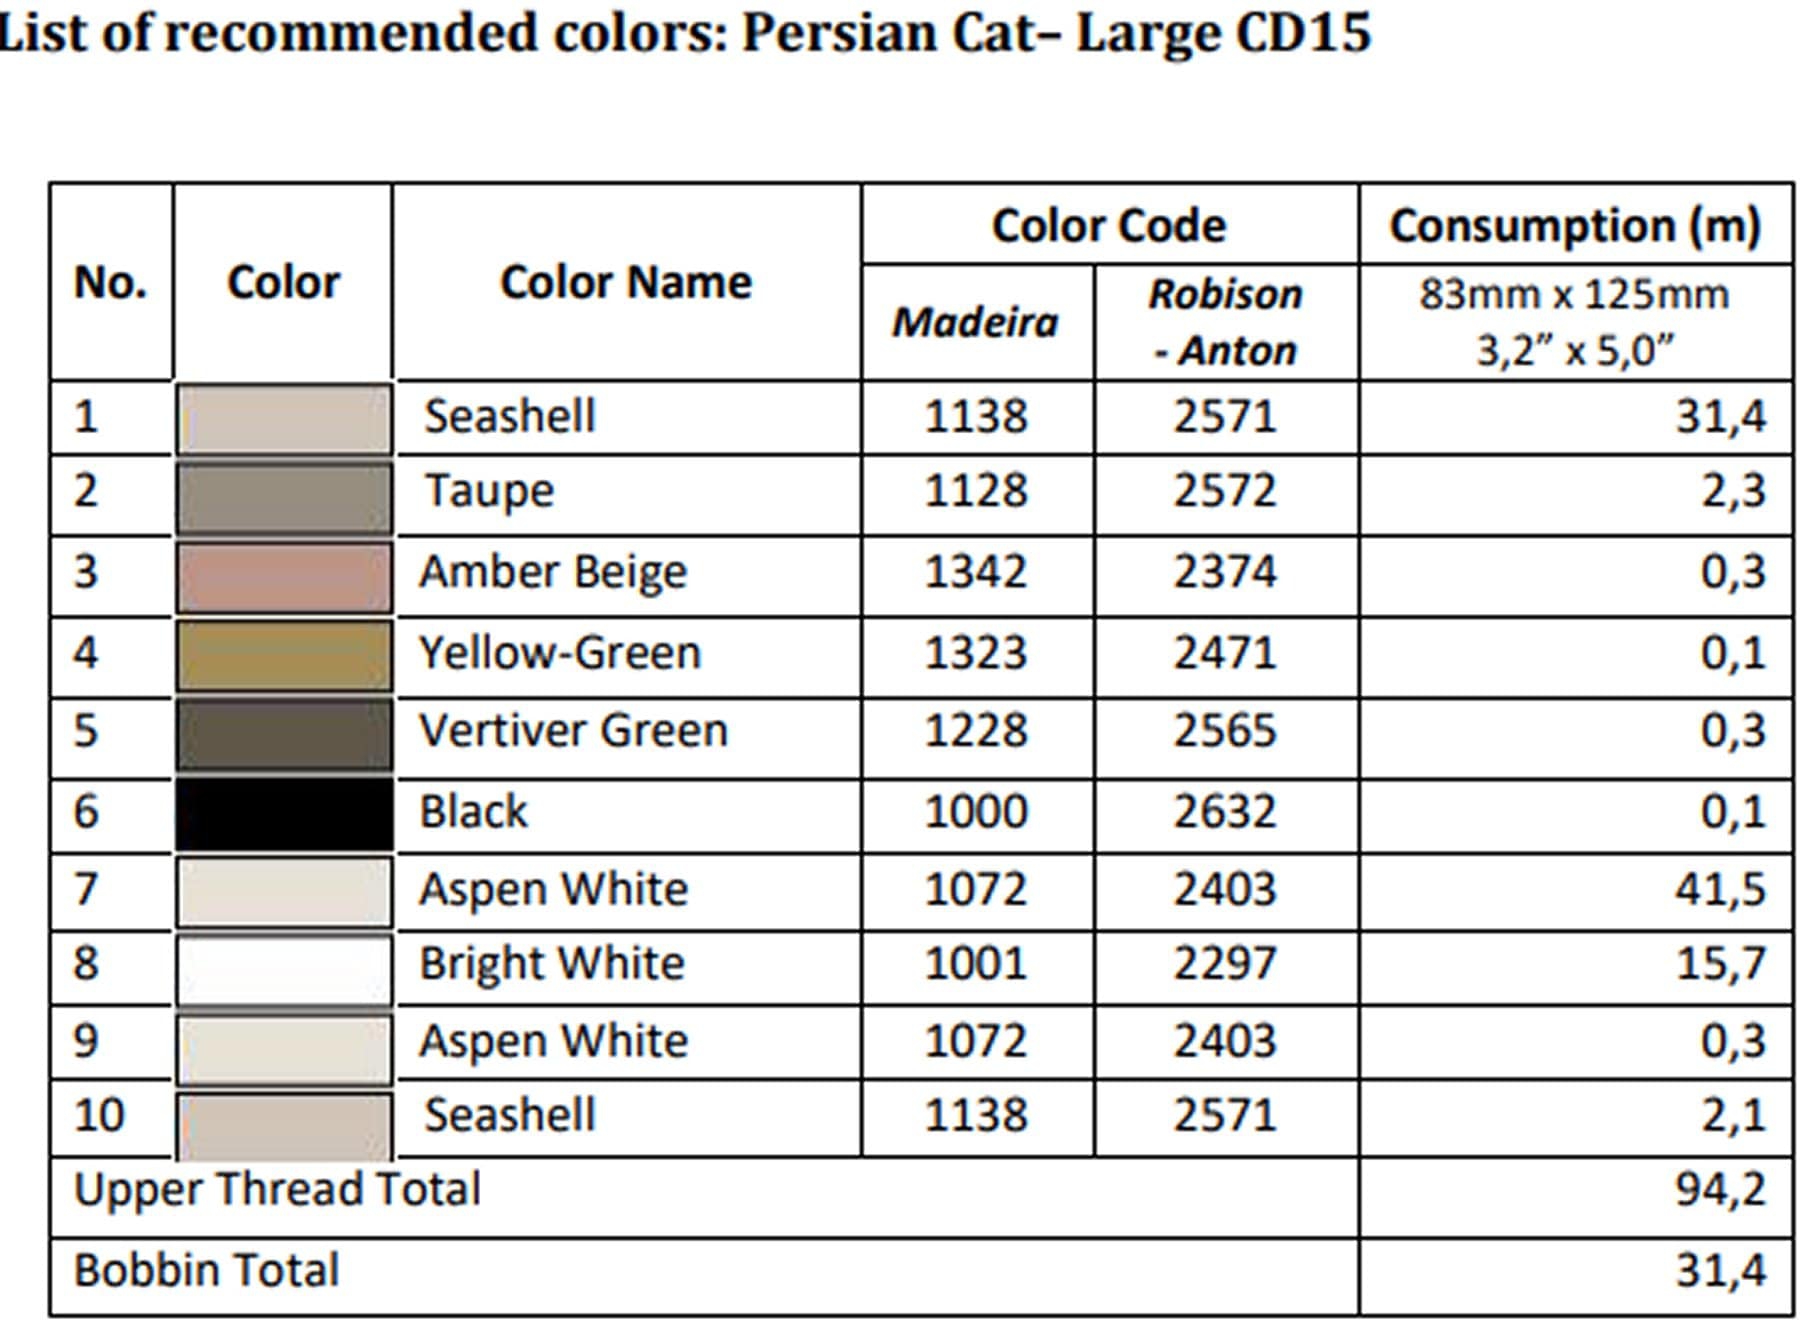 List of recommended colors - LargeCD15